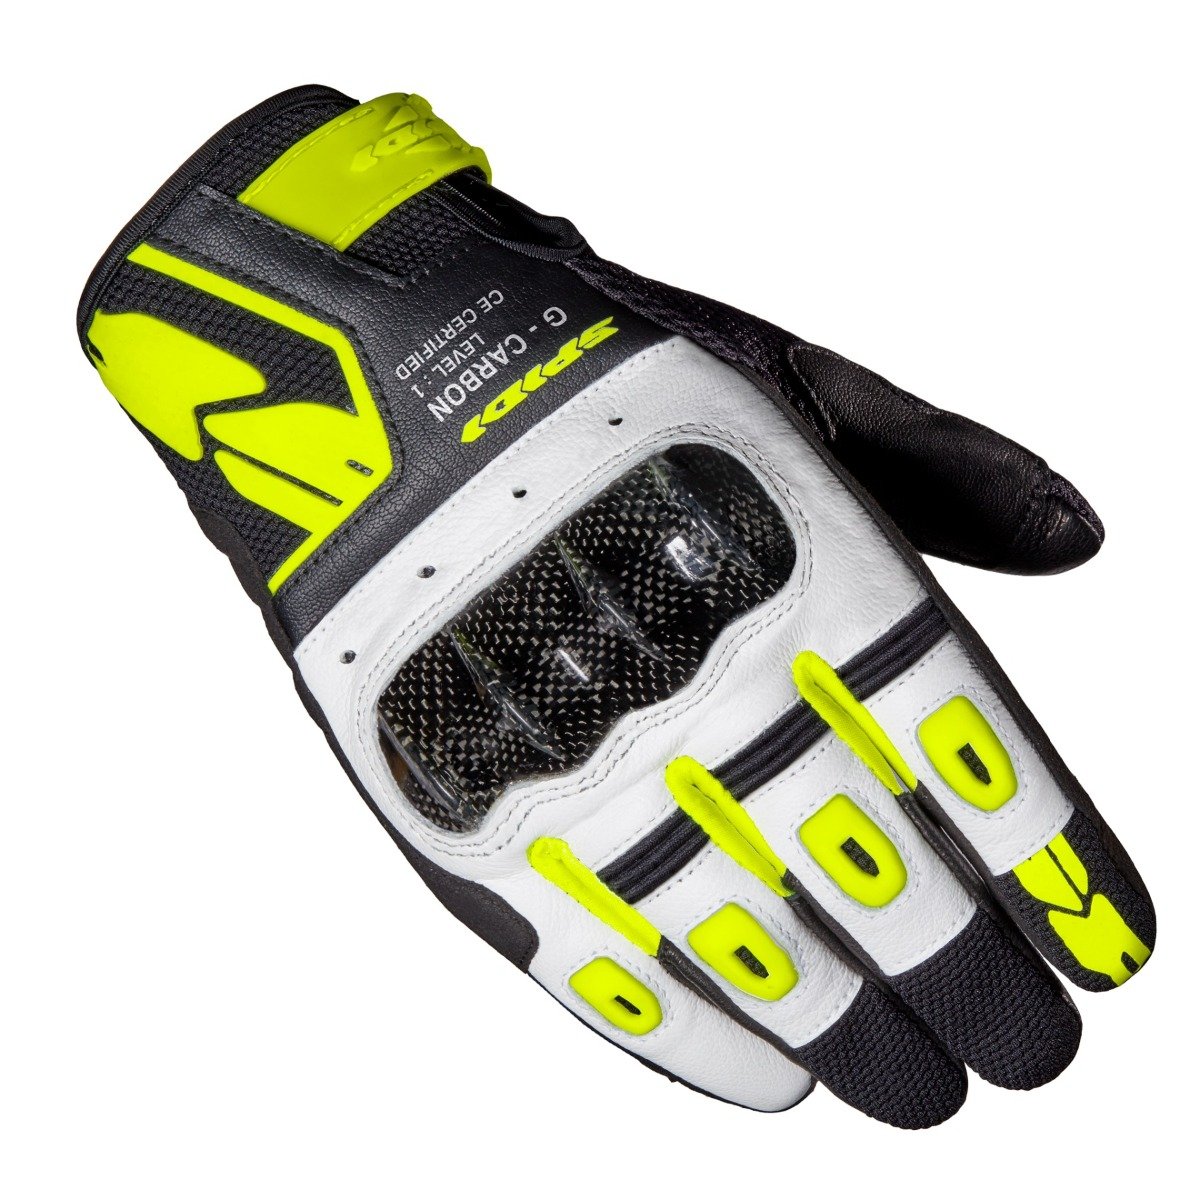 Image of Spidi G-Carbon Black Fluo Yellow Size S ID 8030161314861